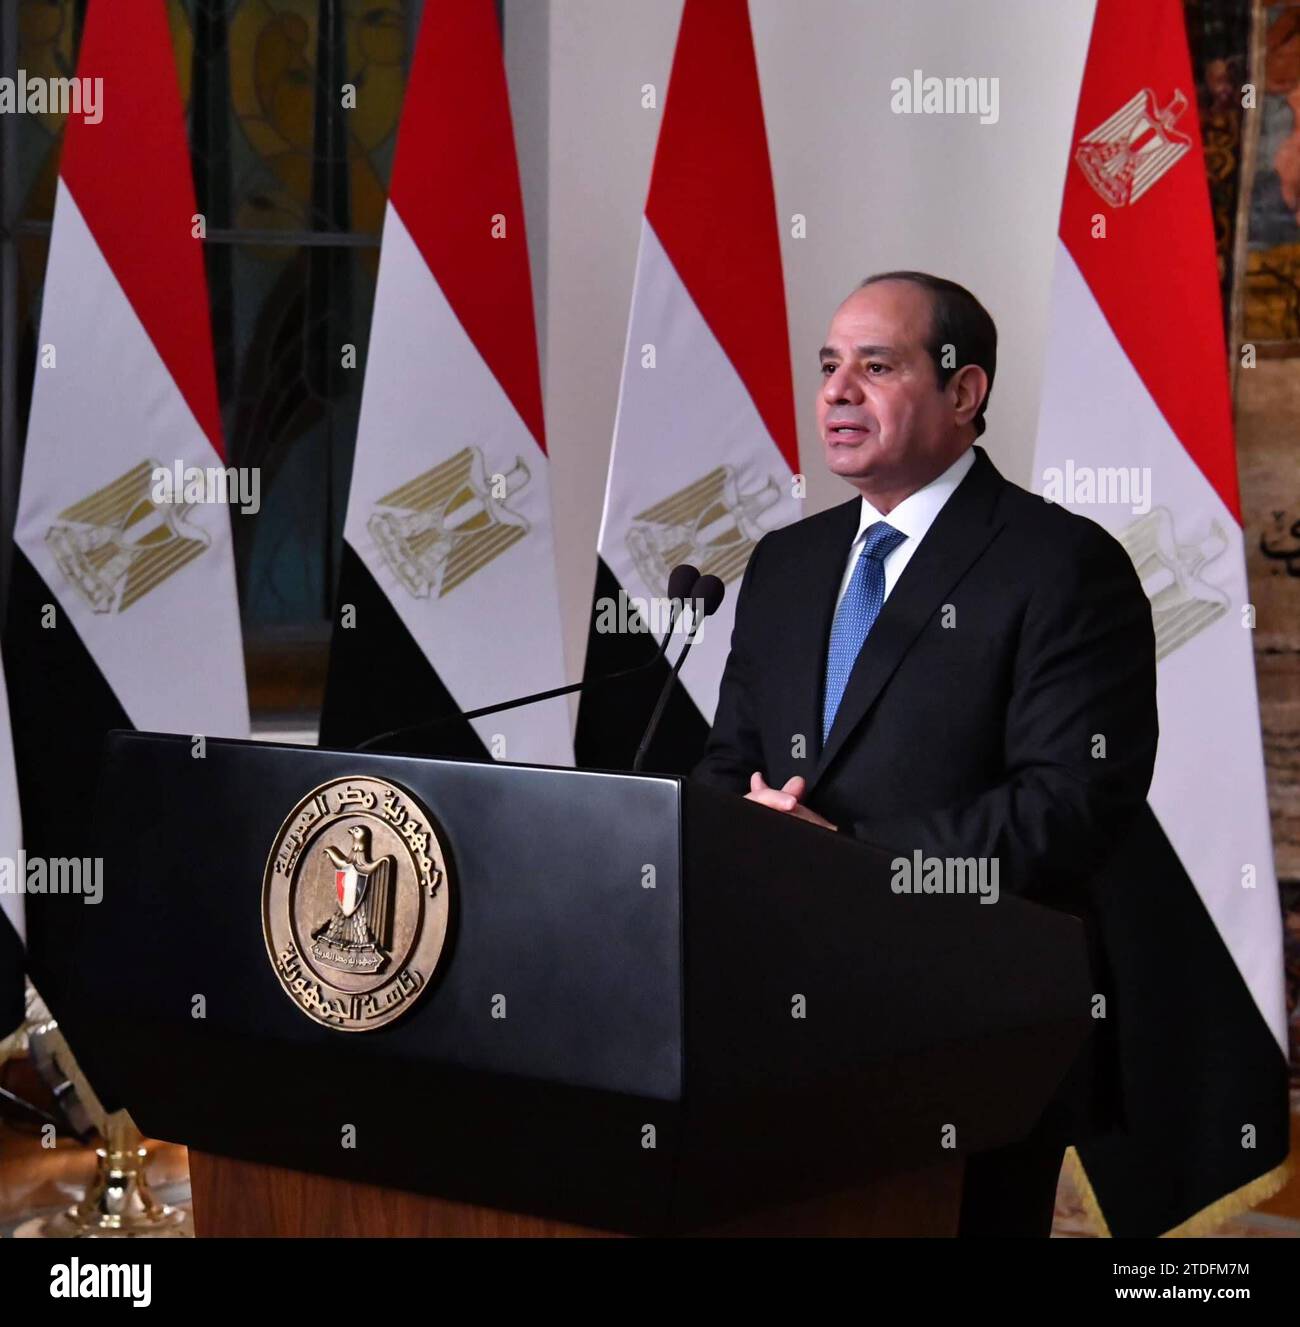 Egyptian President Abdel Fattah El-Sisi speaks during a speech following the announcement of the results Egyptian President Abdel Fattah El-Sisi speaks during a speech following the announcement of the results of the Egyptian presidential elections in Cairo, Egypt, on December 18, 2023. Egypt s President Abdel Fattah al-Sisi has won a new six-year term with 89.6 percent of the vote, the election authority announced on December 18. Turnout reached an unprecedented 66.8 percent of Egypt s 67 million voters, said its chief, Hazem Badawy. Over 39 million voted for Sisi, a former army chief who has Stock Photo